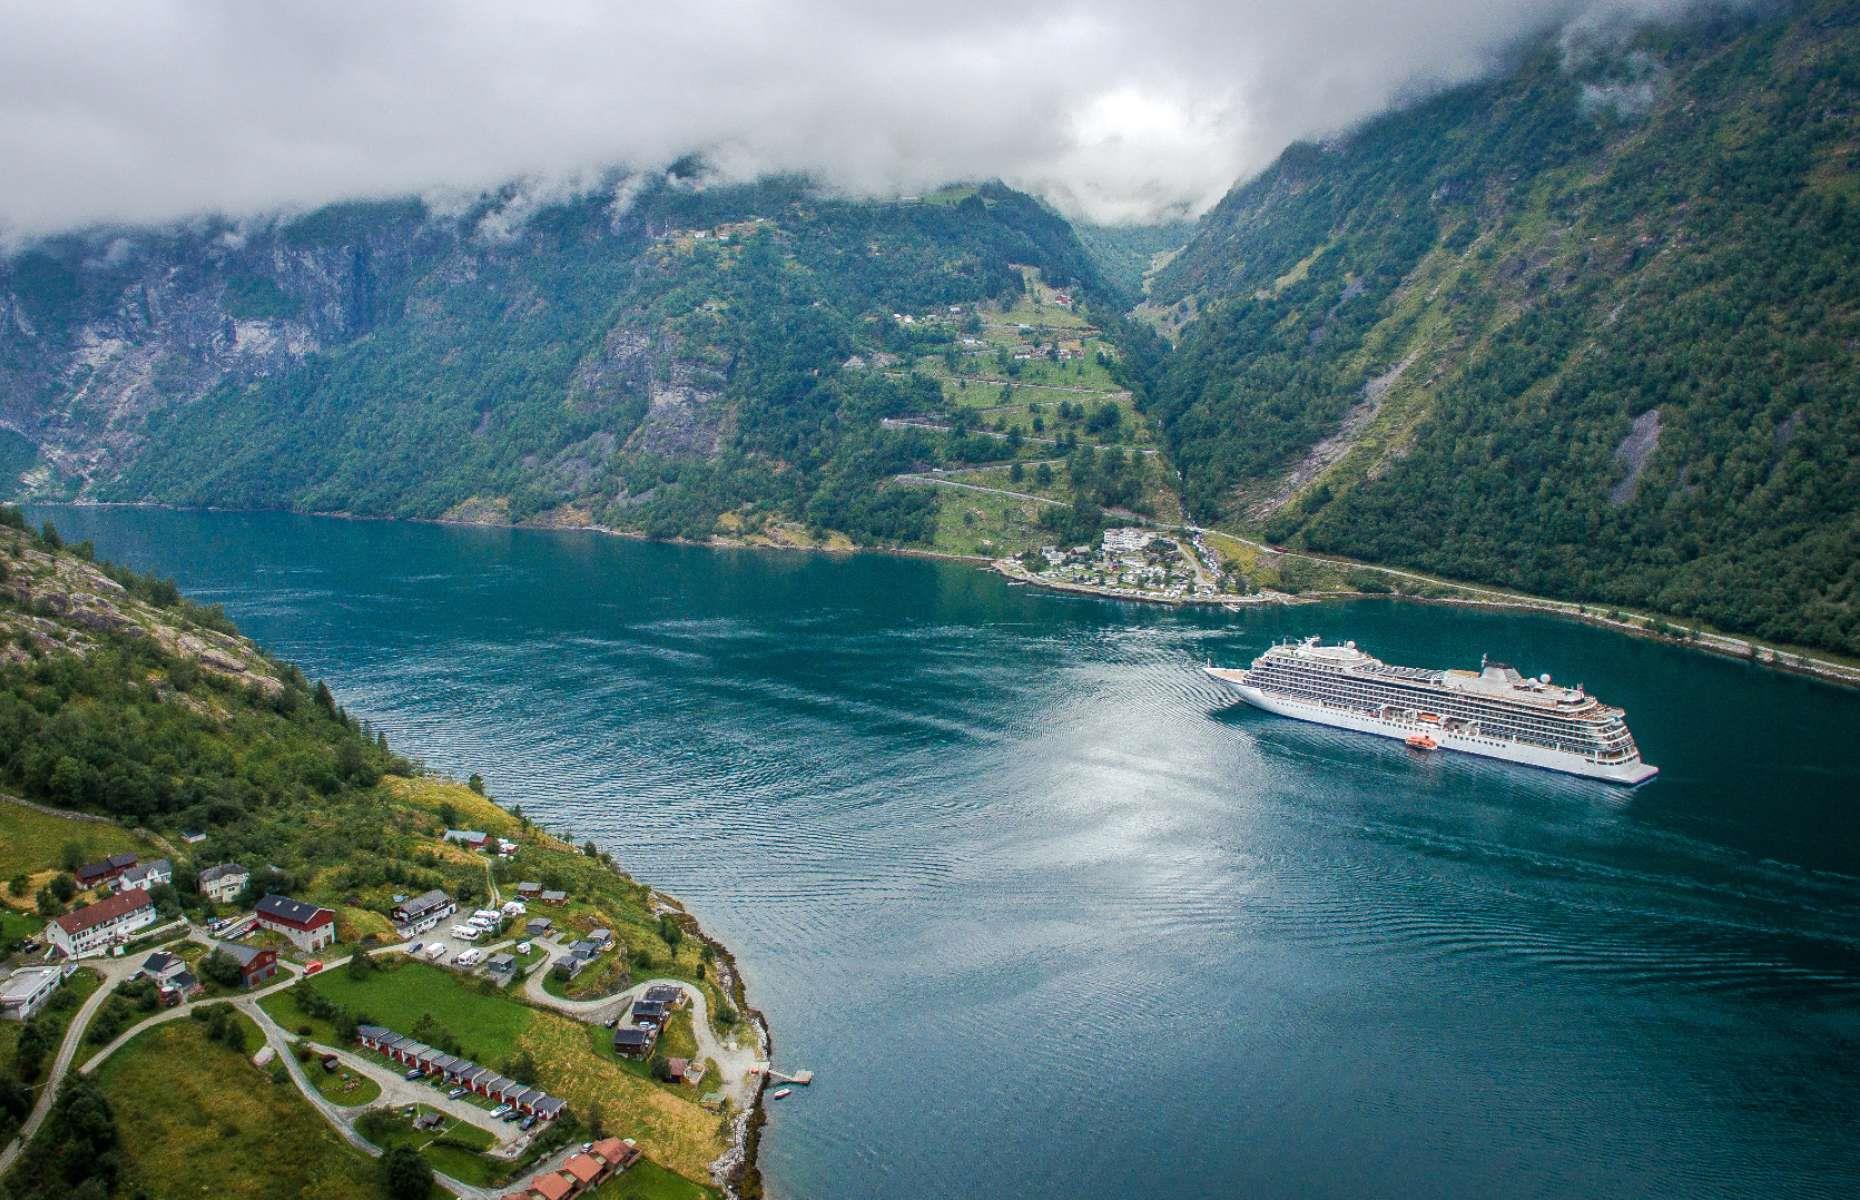 <p>Cruise guests will enjoy magnificent views of the UNESCO World Heritage-listed Geirangerfjord area as they head to the small cruise port. Lined by mountains and waterfalls, the fjord has a magical looking landscape and a very small village. Cruise lines offer excursions from the port, such as kayaking along the waterways, helicopter rides and hiking tours to amazing viewpoints like Eagle Bend and Dalsnibba mountain. Lines including Viking, Hurtigruten, Windstar, Silversea, HAL, Ponant, Celebrity and Cunard all have itineraries to the destination.</p>